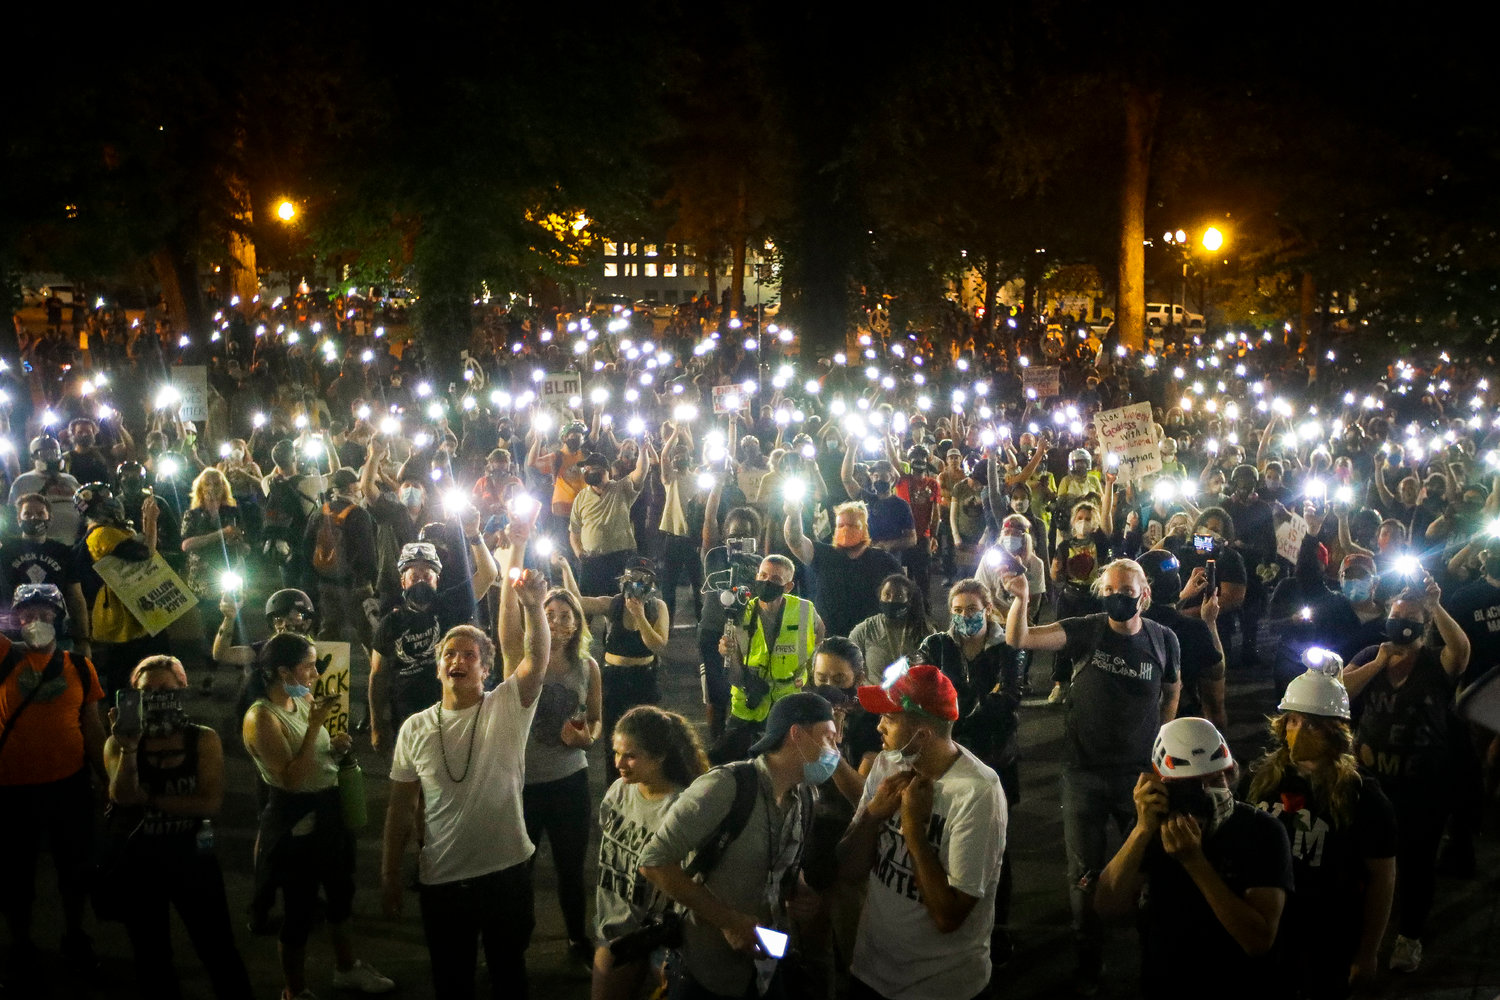 MINIATURE LIGHTS — Demonstrators raise their cell phone lights as they chant slogans during a Black Lives Matter protest at the Mark O. Hatfield United States Courthouse Wednesday in Portland, Ore.                  (AP Photo)